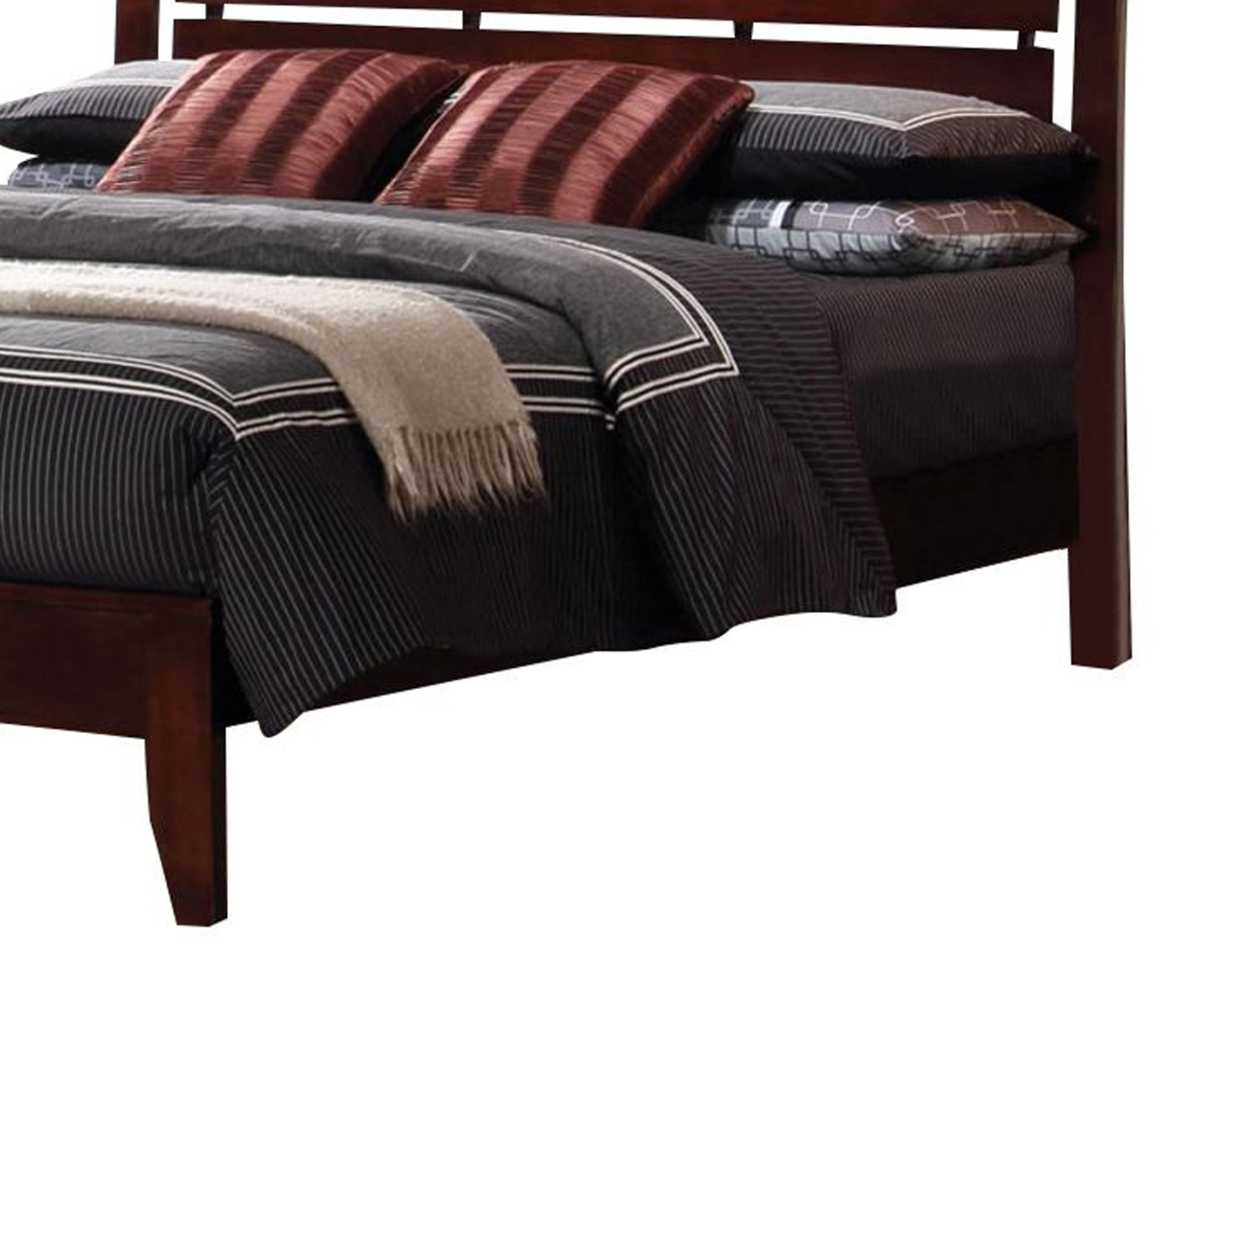 Transitional Eastern King Size Wooden Bed With Slatted Headboard, Brown- Saltoro Sherpi